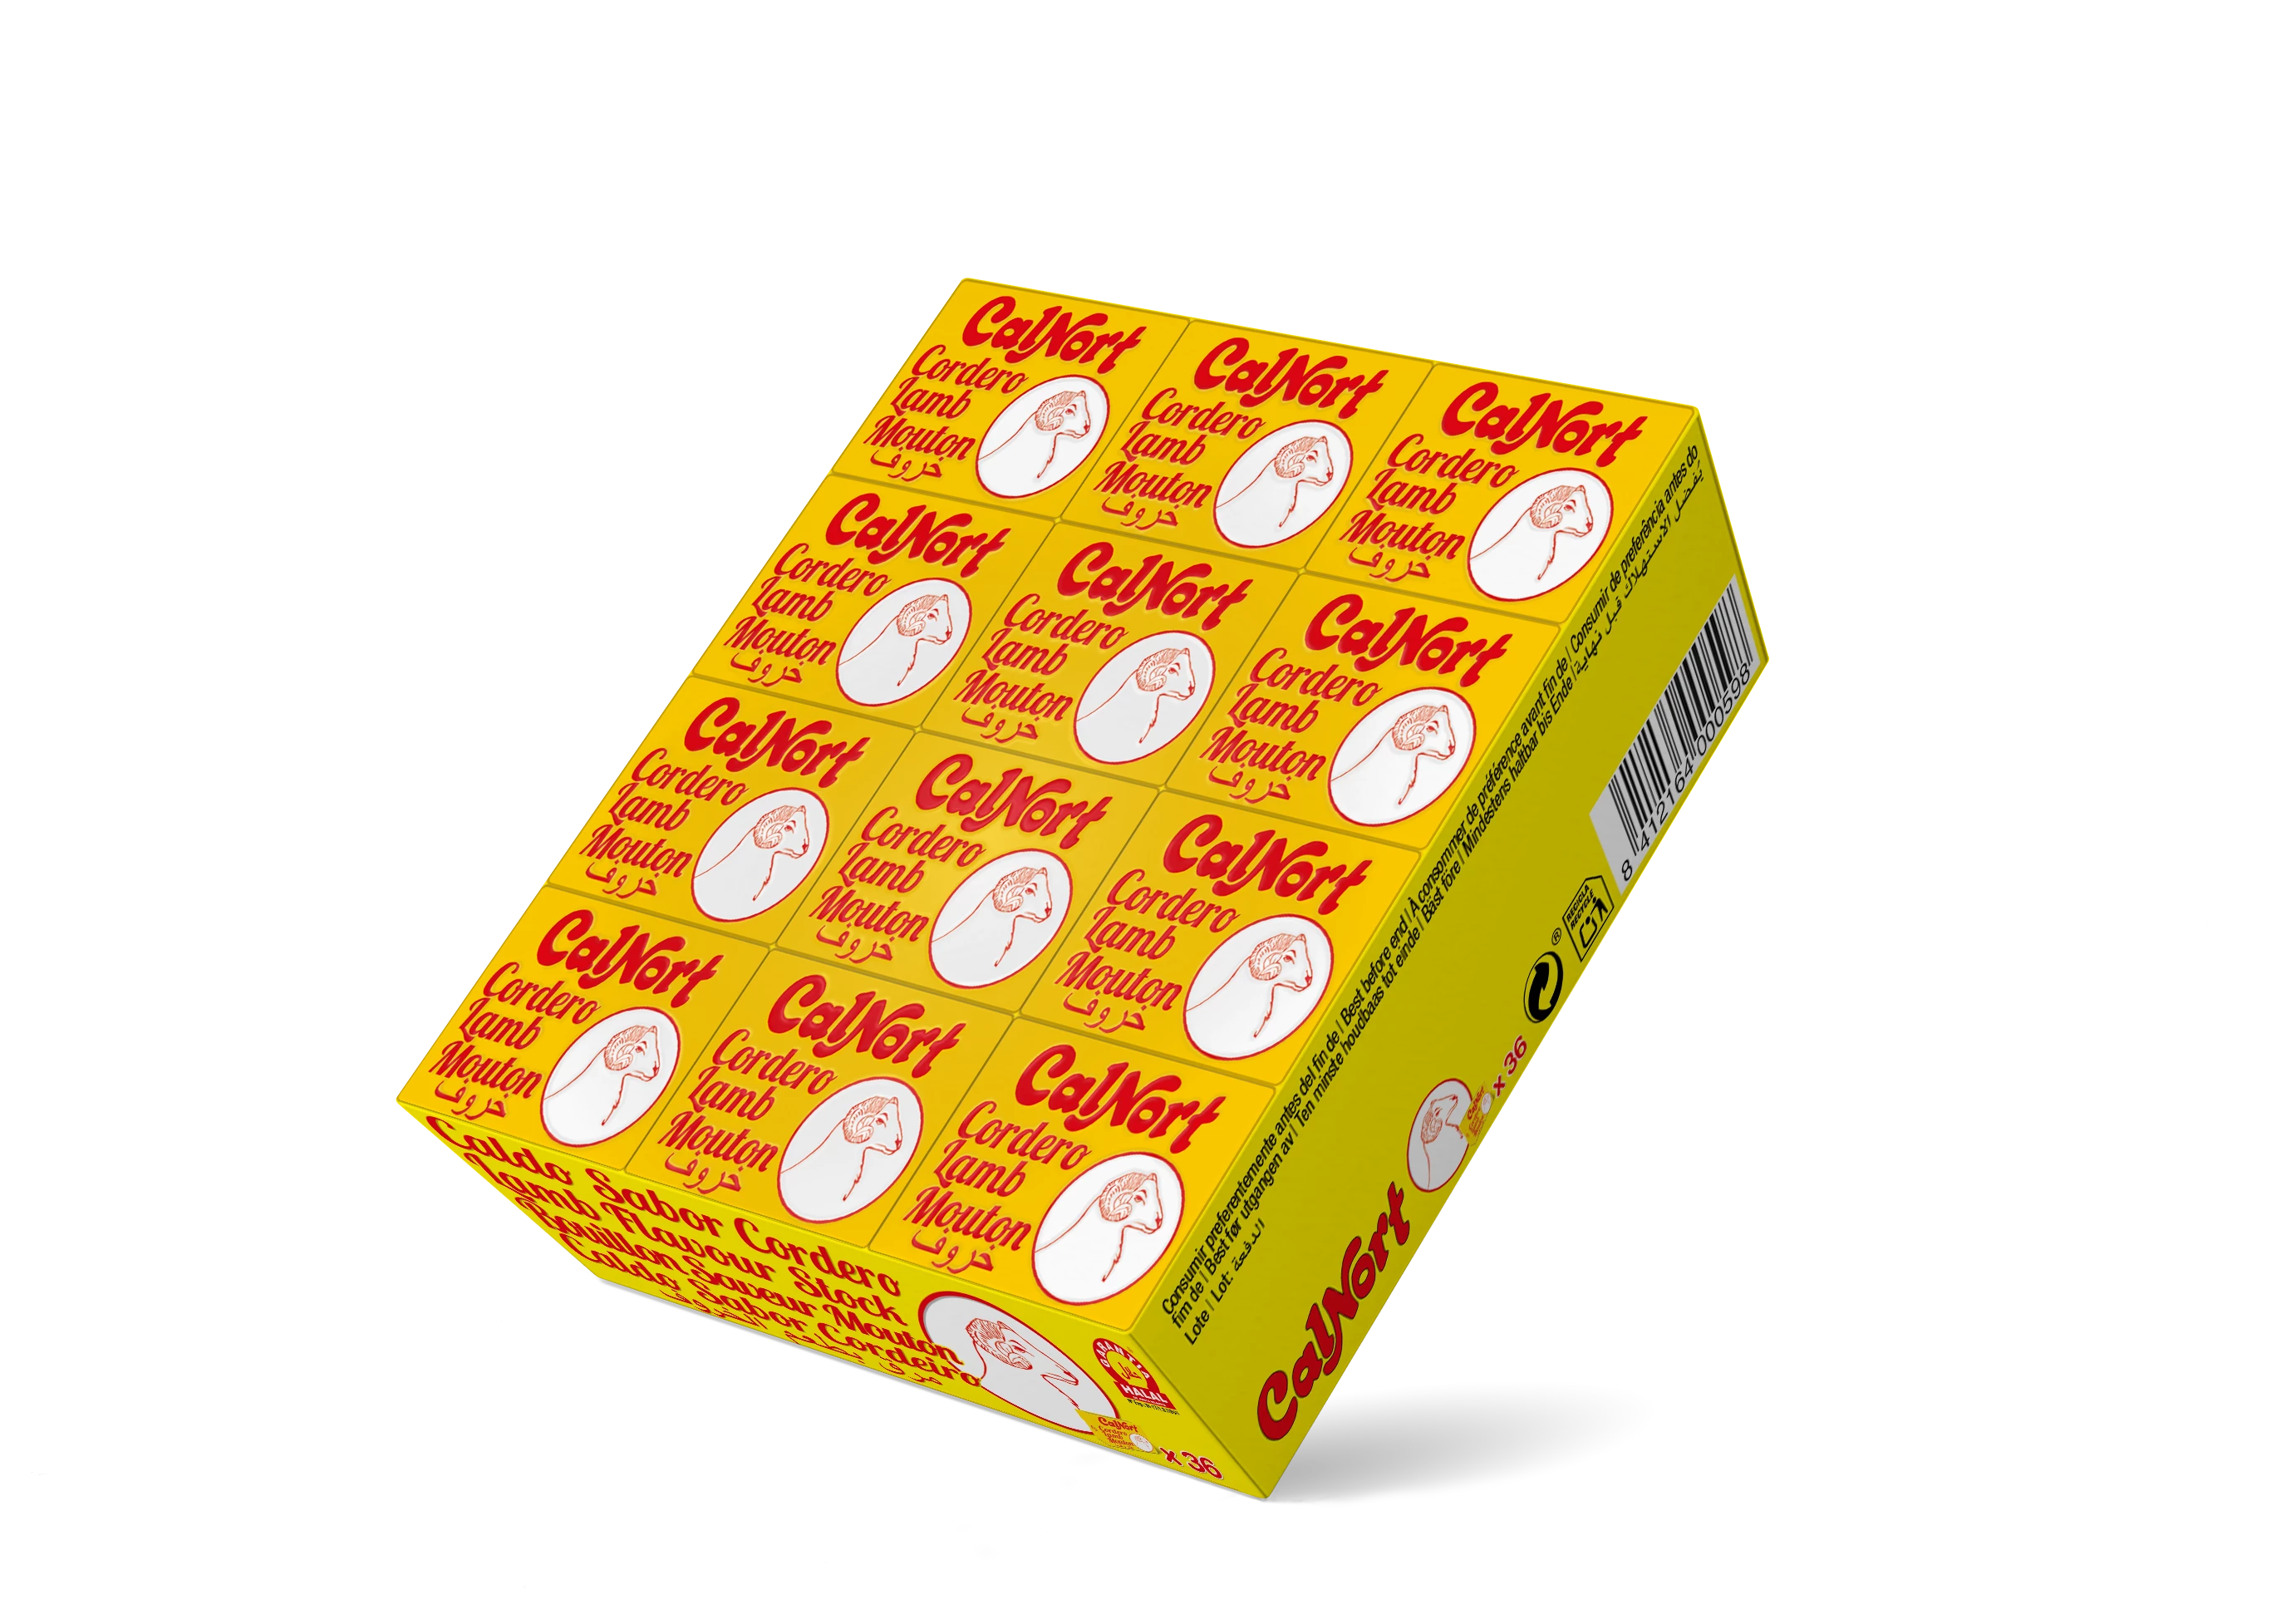 Sheep Flavor Broth Cubed 36 Cubes - CALNORT